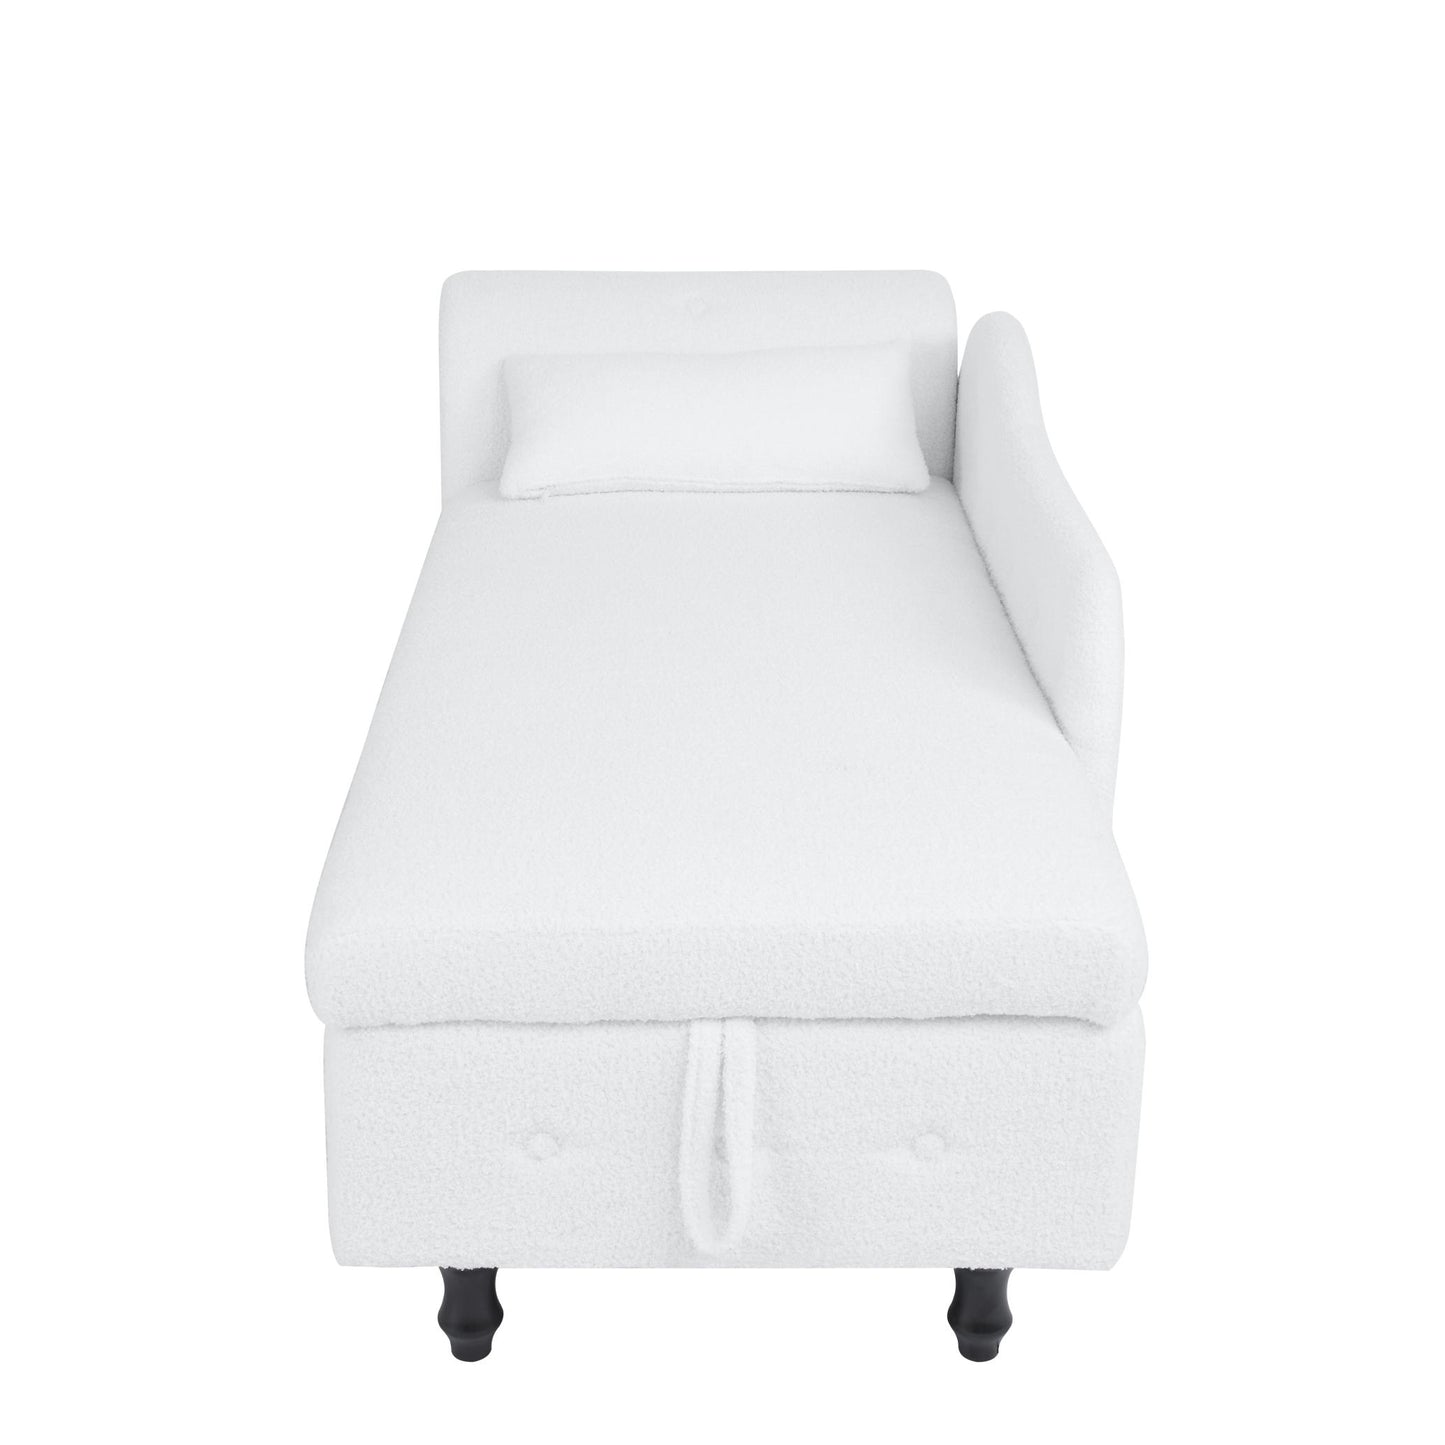 Teddy Ottoman with Storage Bench, Safety Hinge